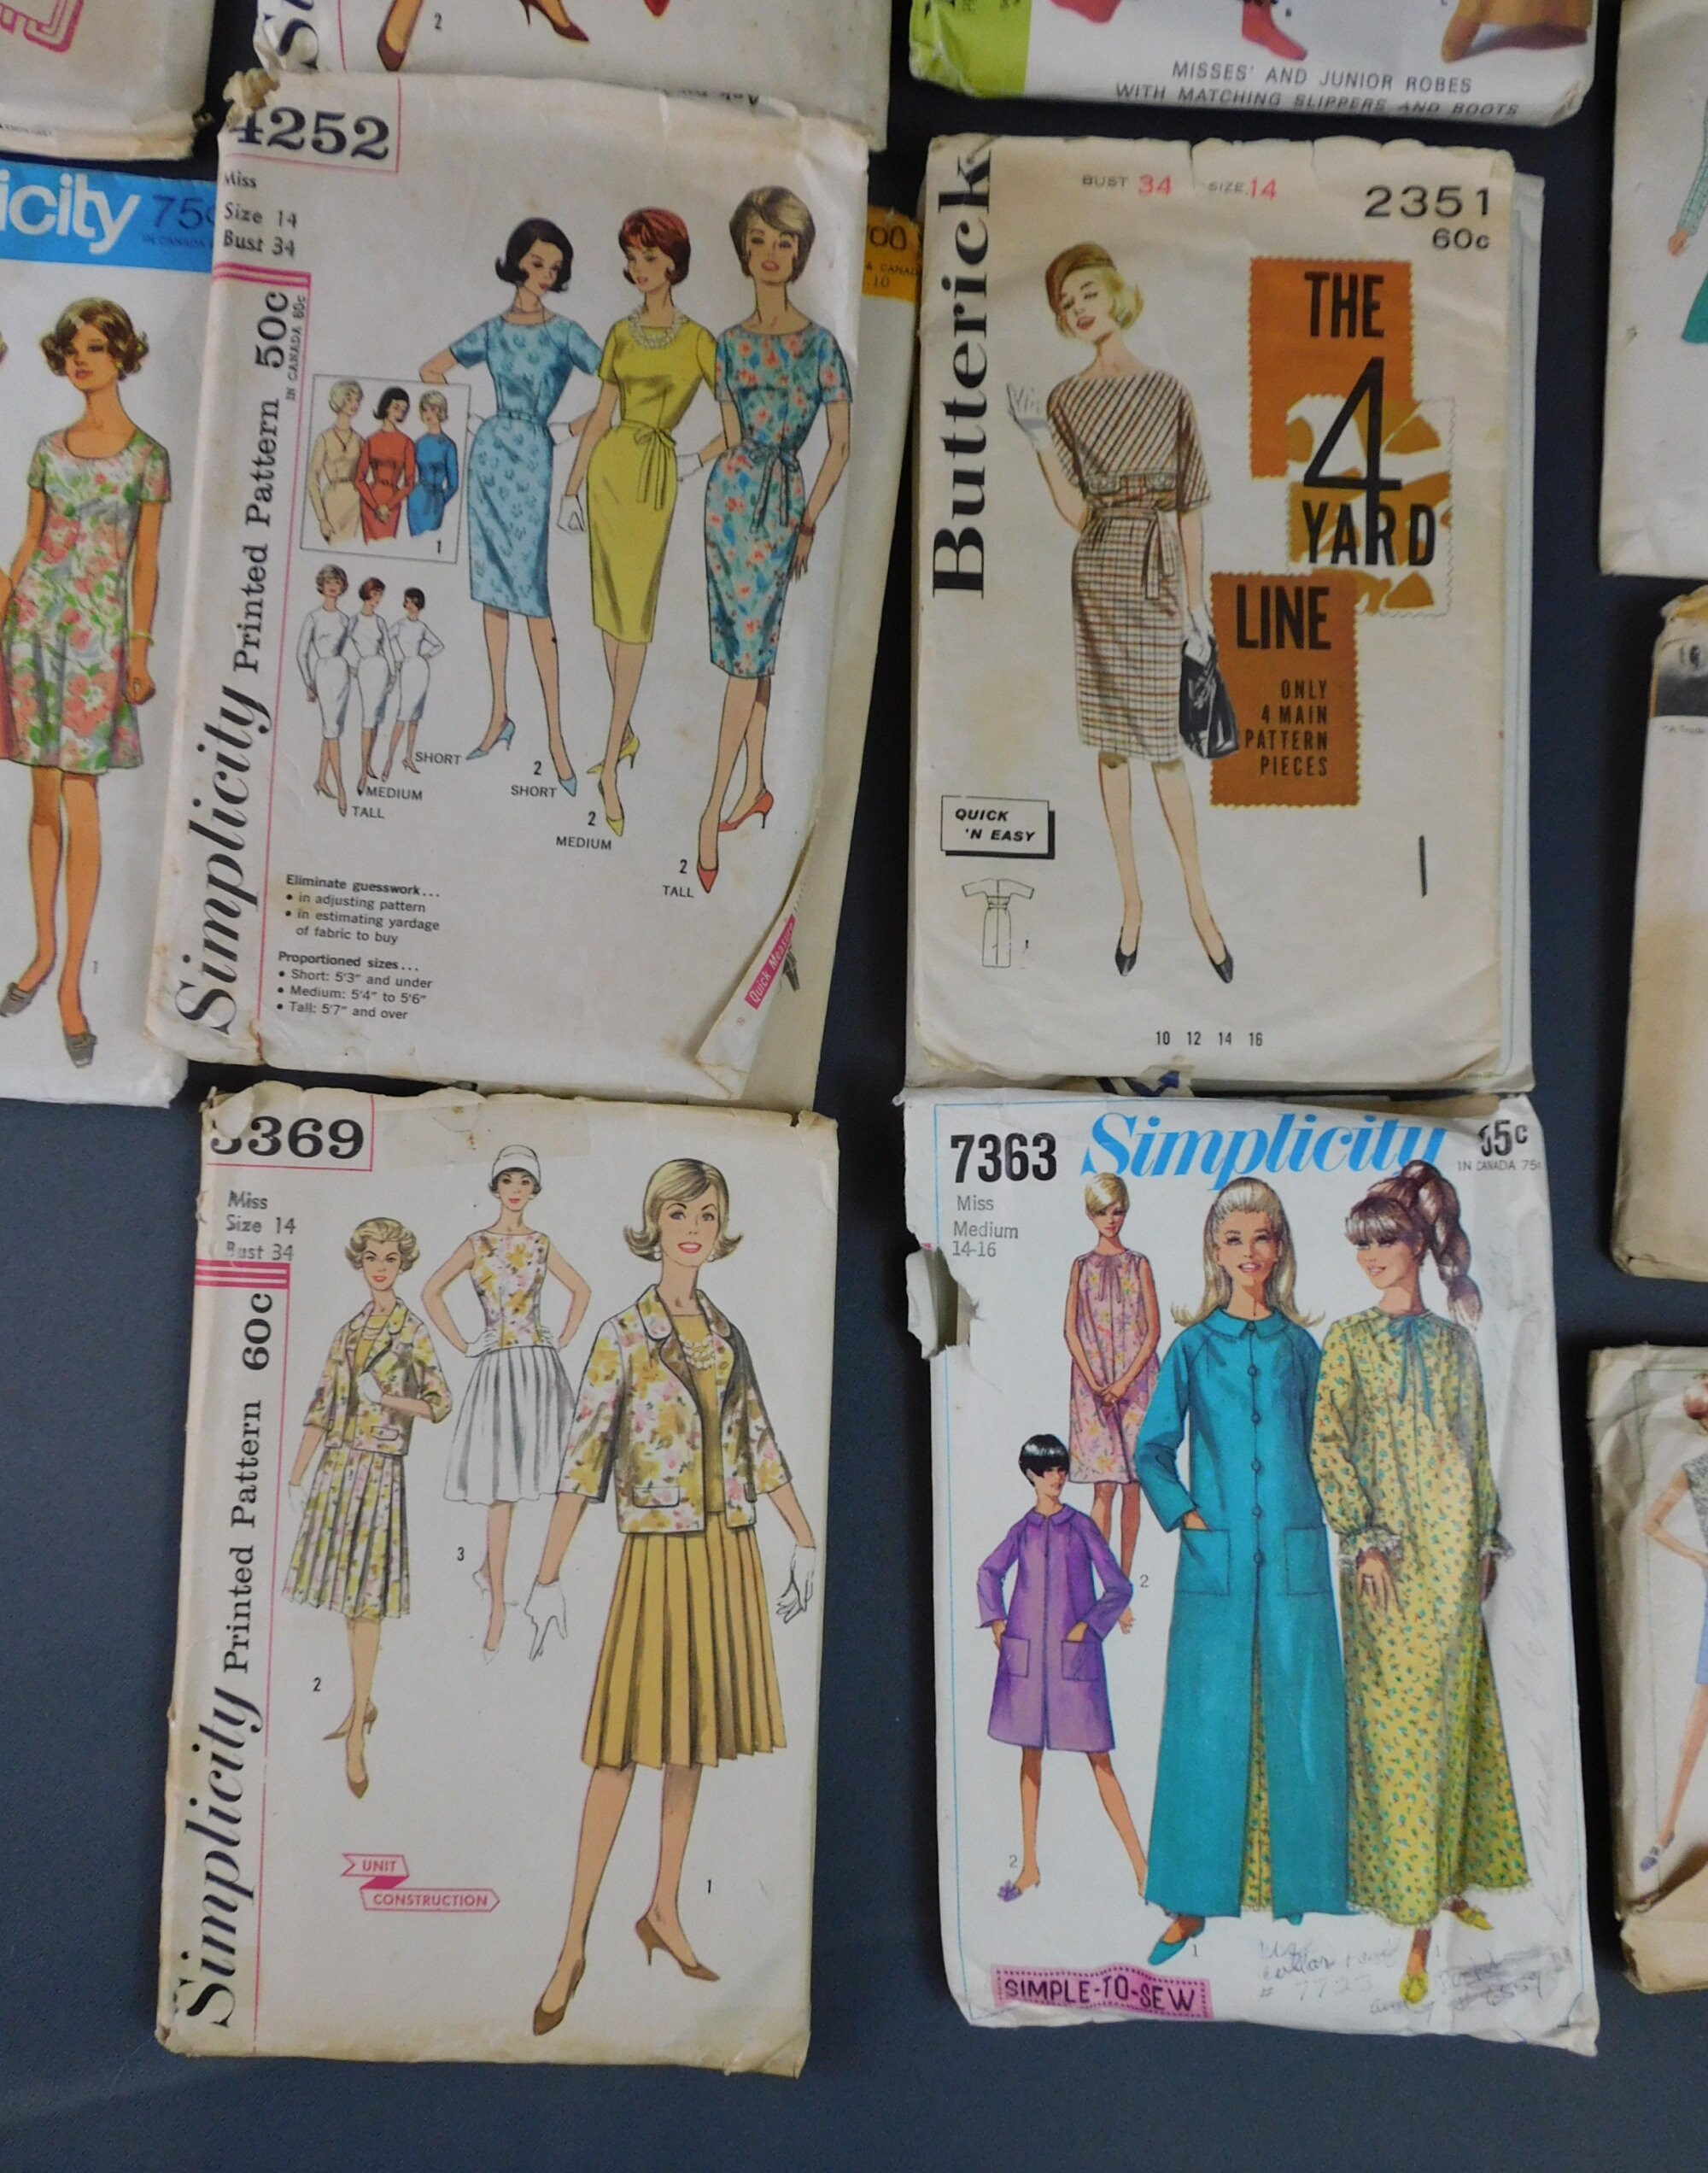 Vintage Lot of 16 Patterns Women's 1960s 1970s 34, 35 & 37 inch bust